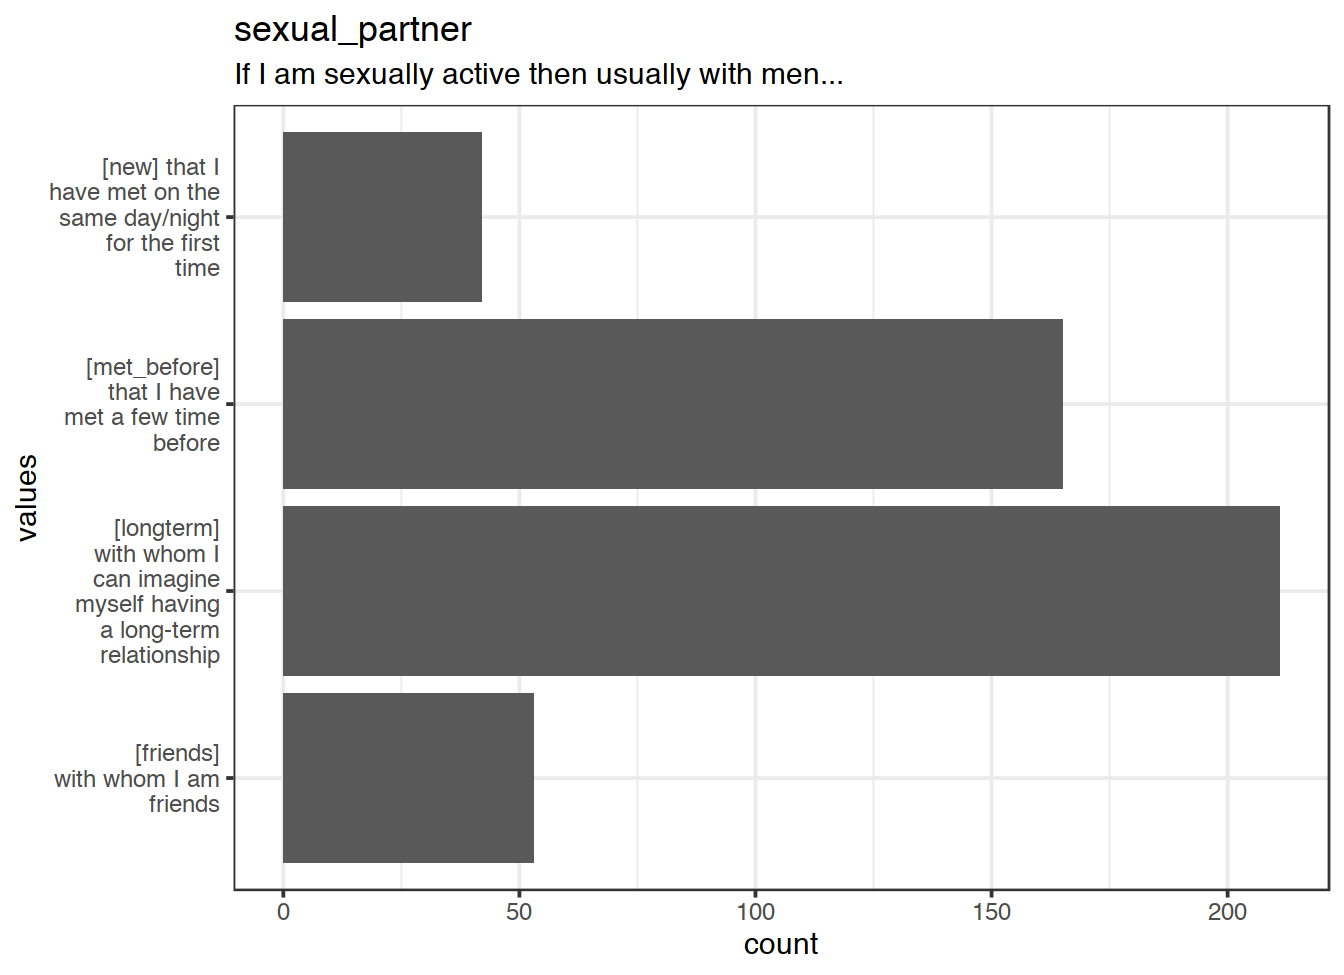 Distribution of values for sexual_partner